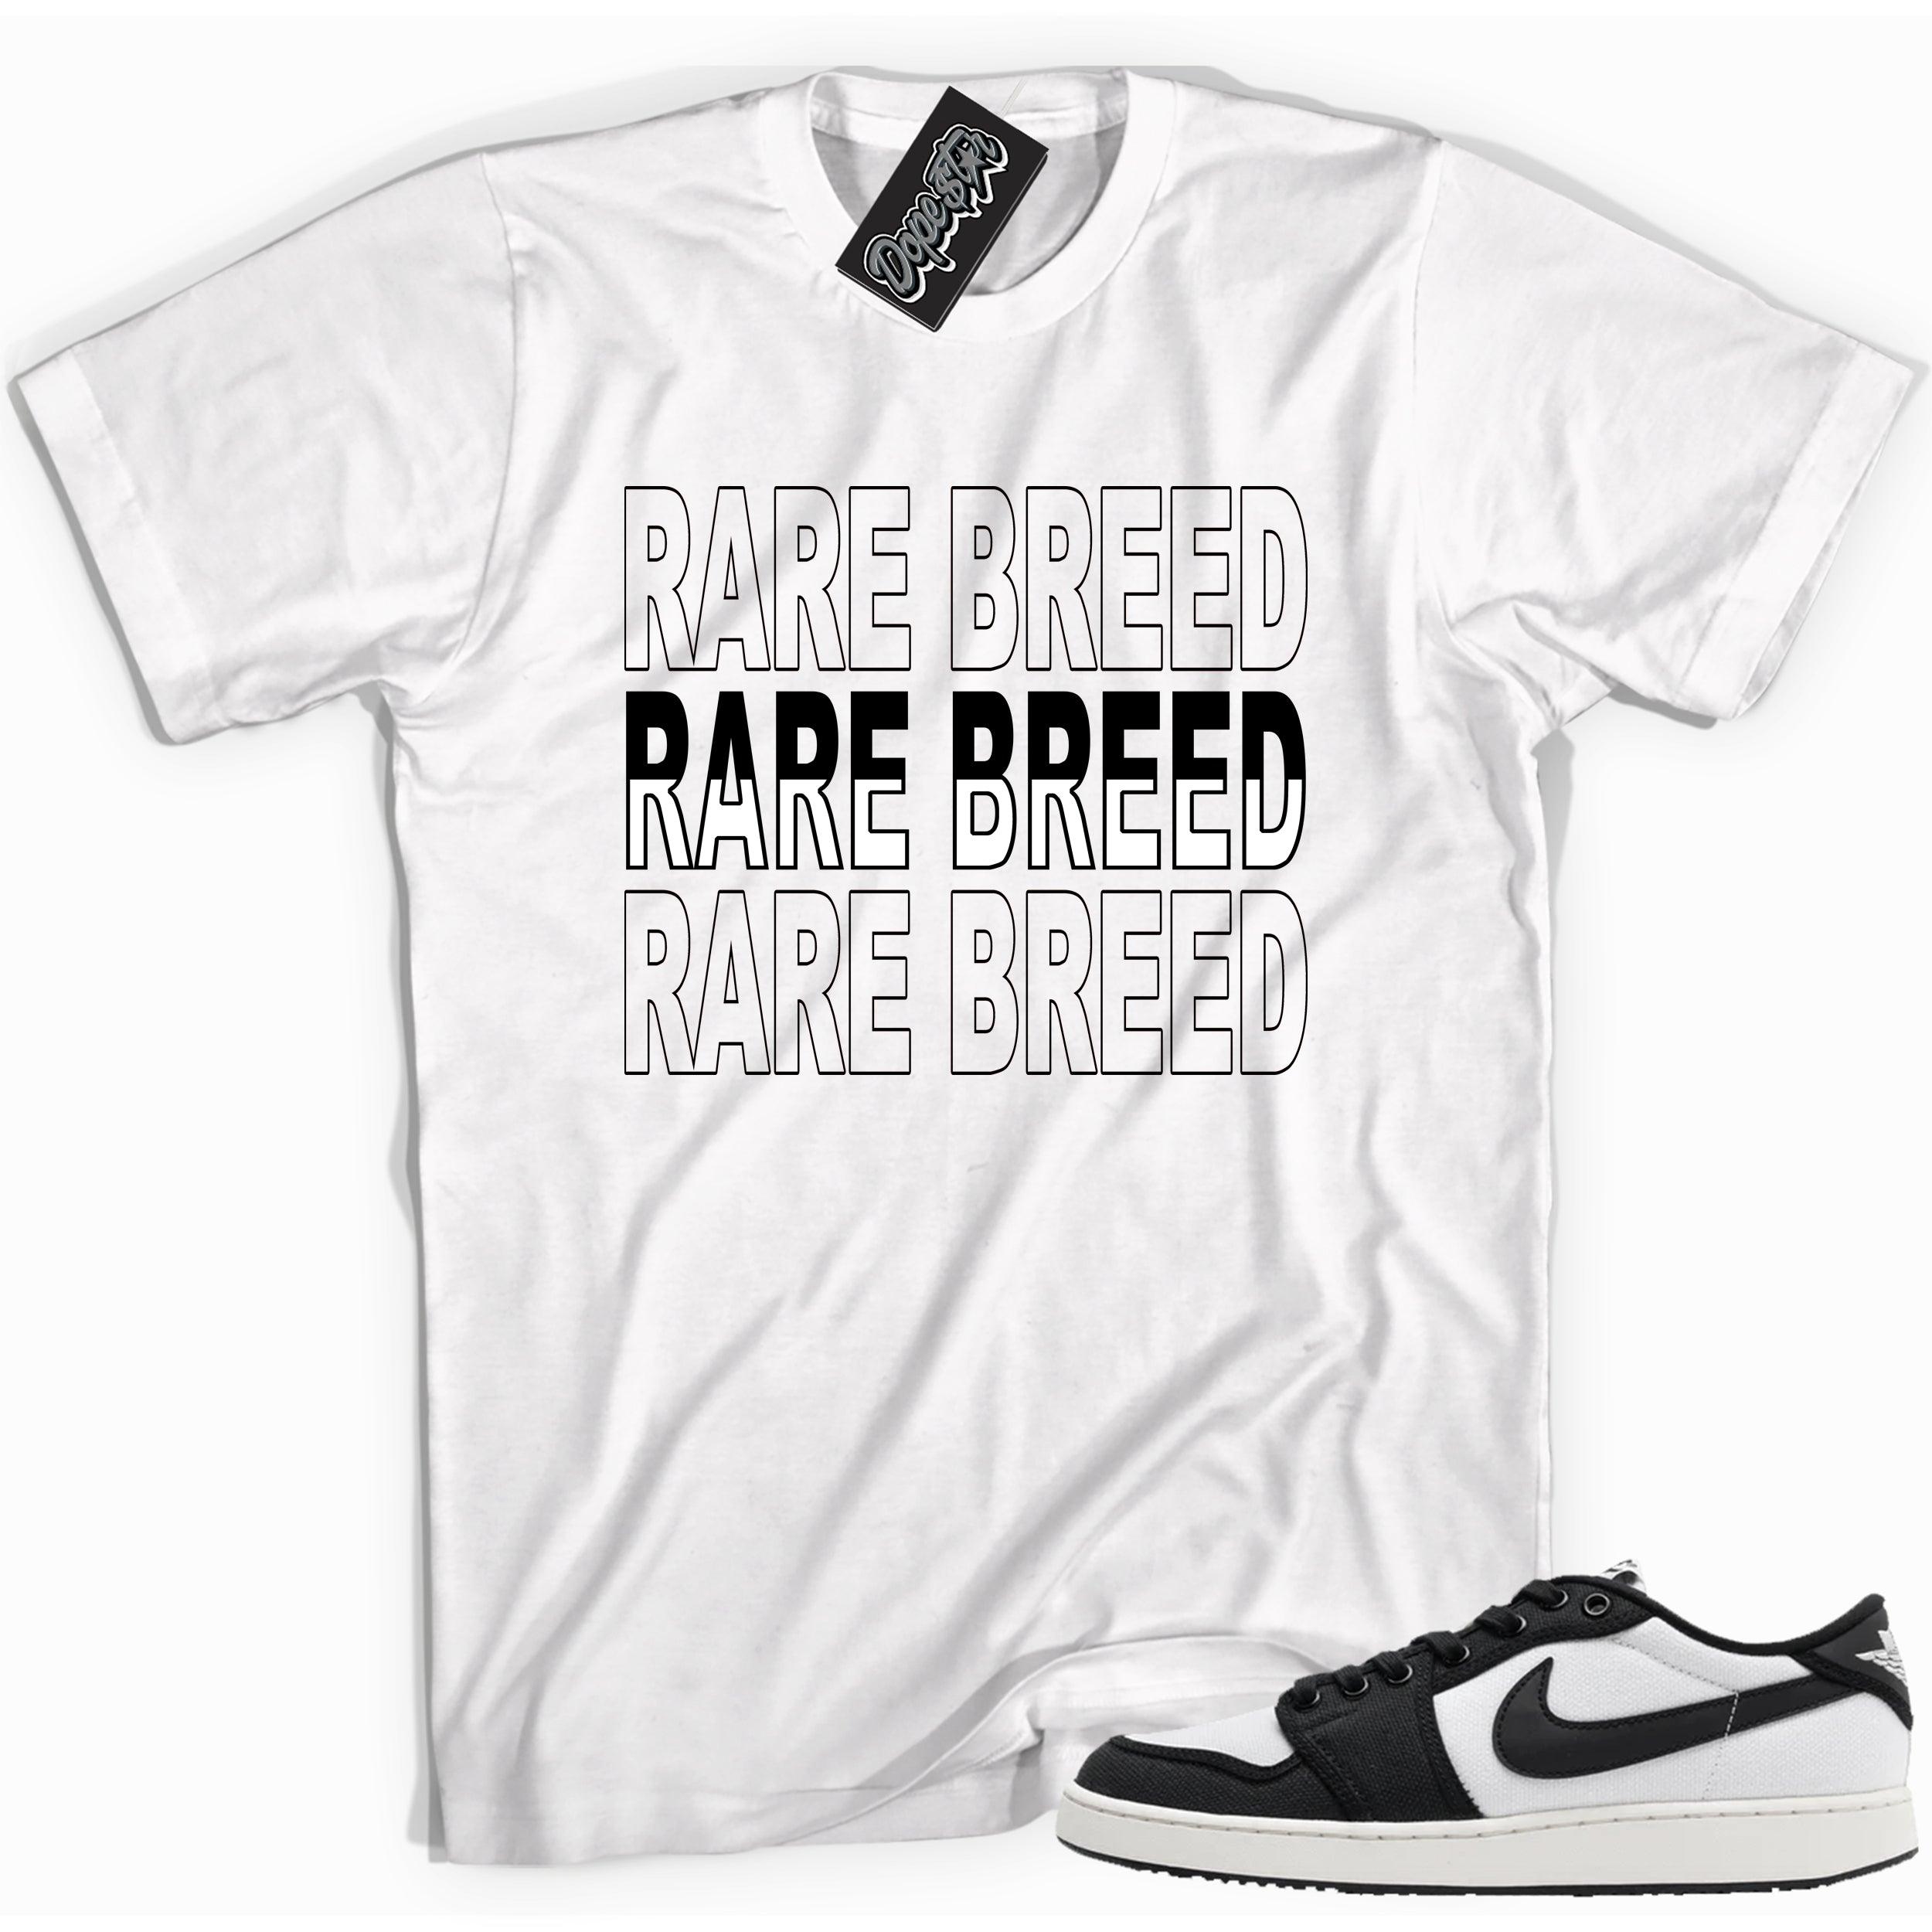 Cool white graphic tee with 'rare breed' print, that perfectly matches Air Jordan 1 Retro Ajko Low Black & White sneakers.